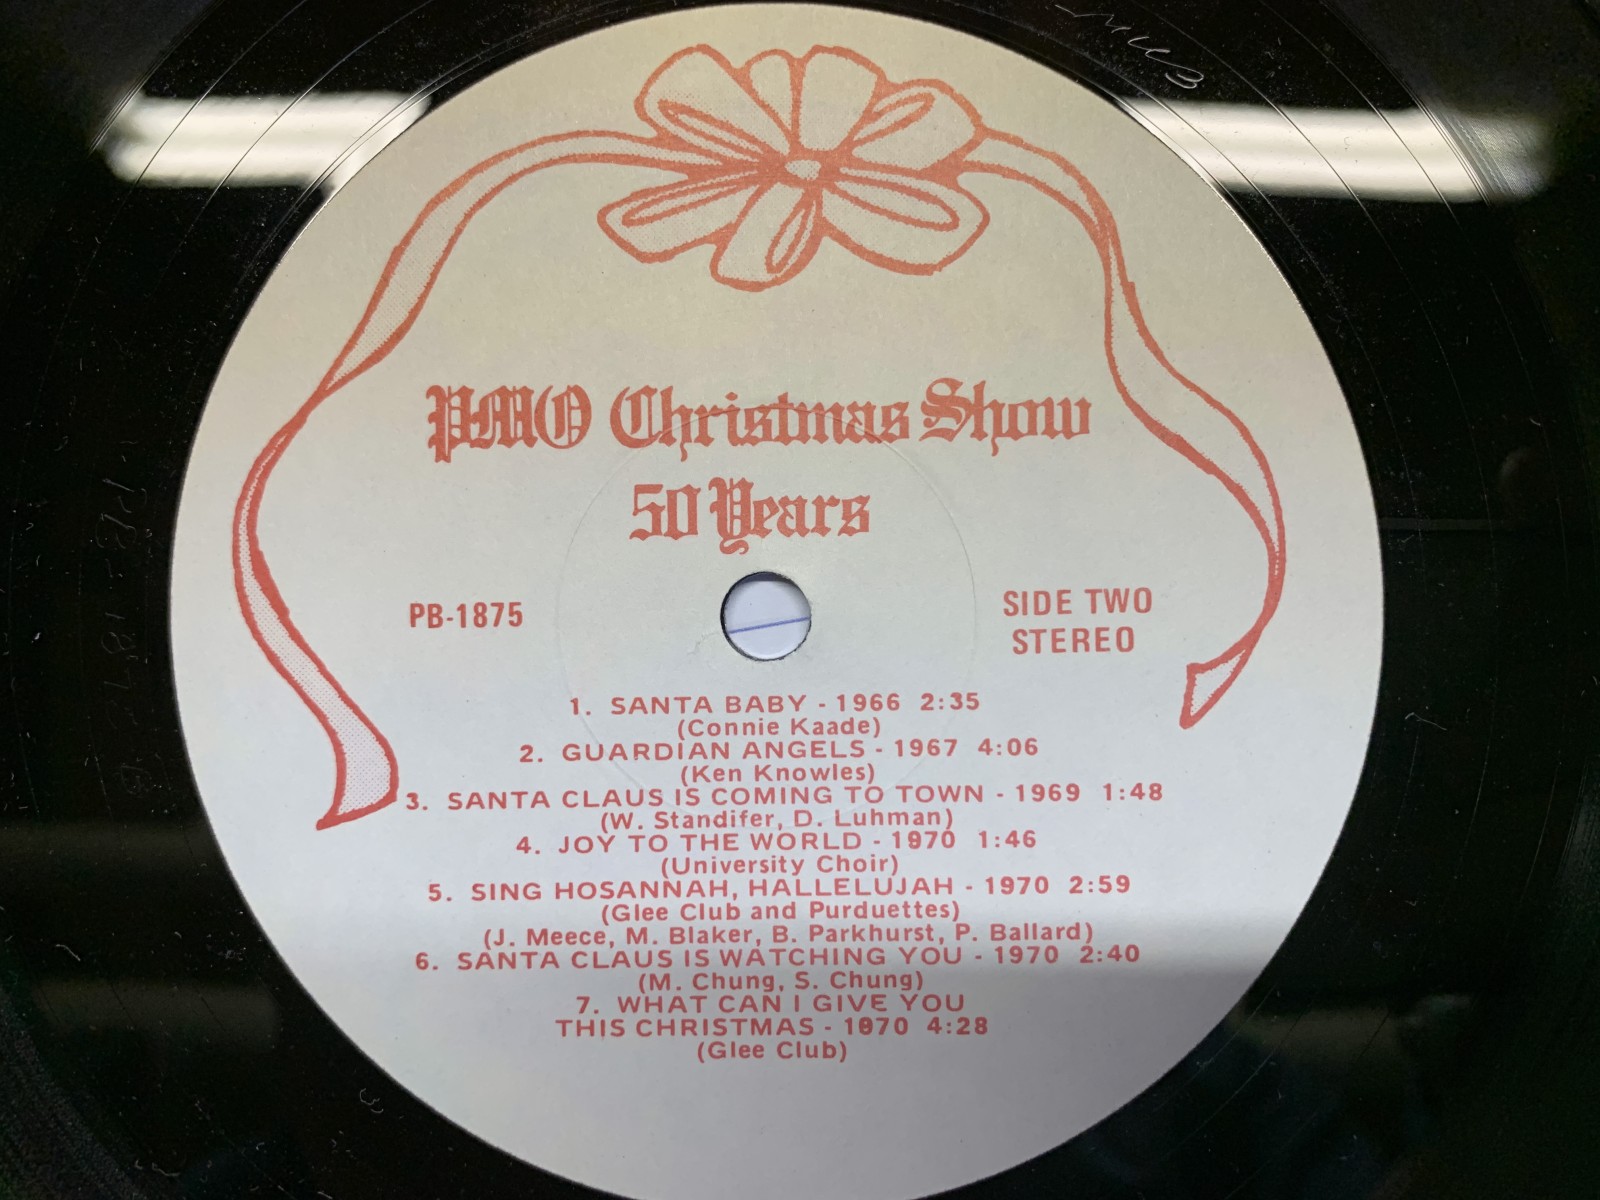 PMO Database / Songs / Collection / PMO Christmas Show 50th Anniversary